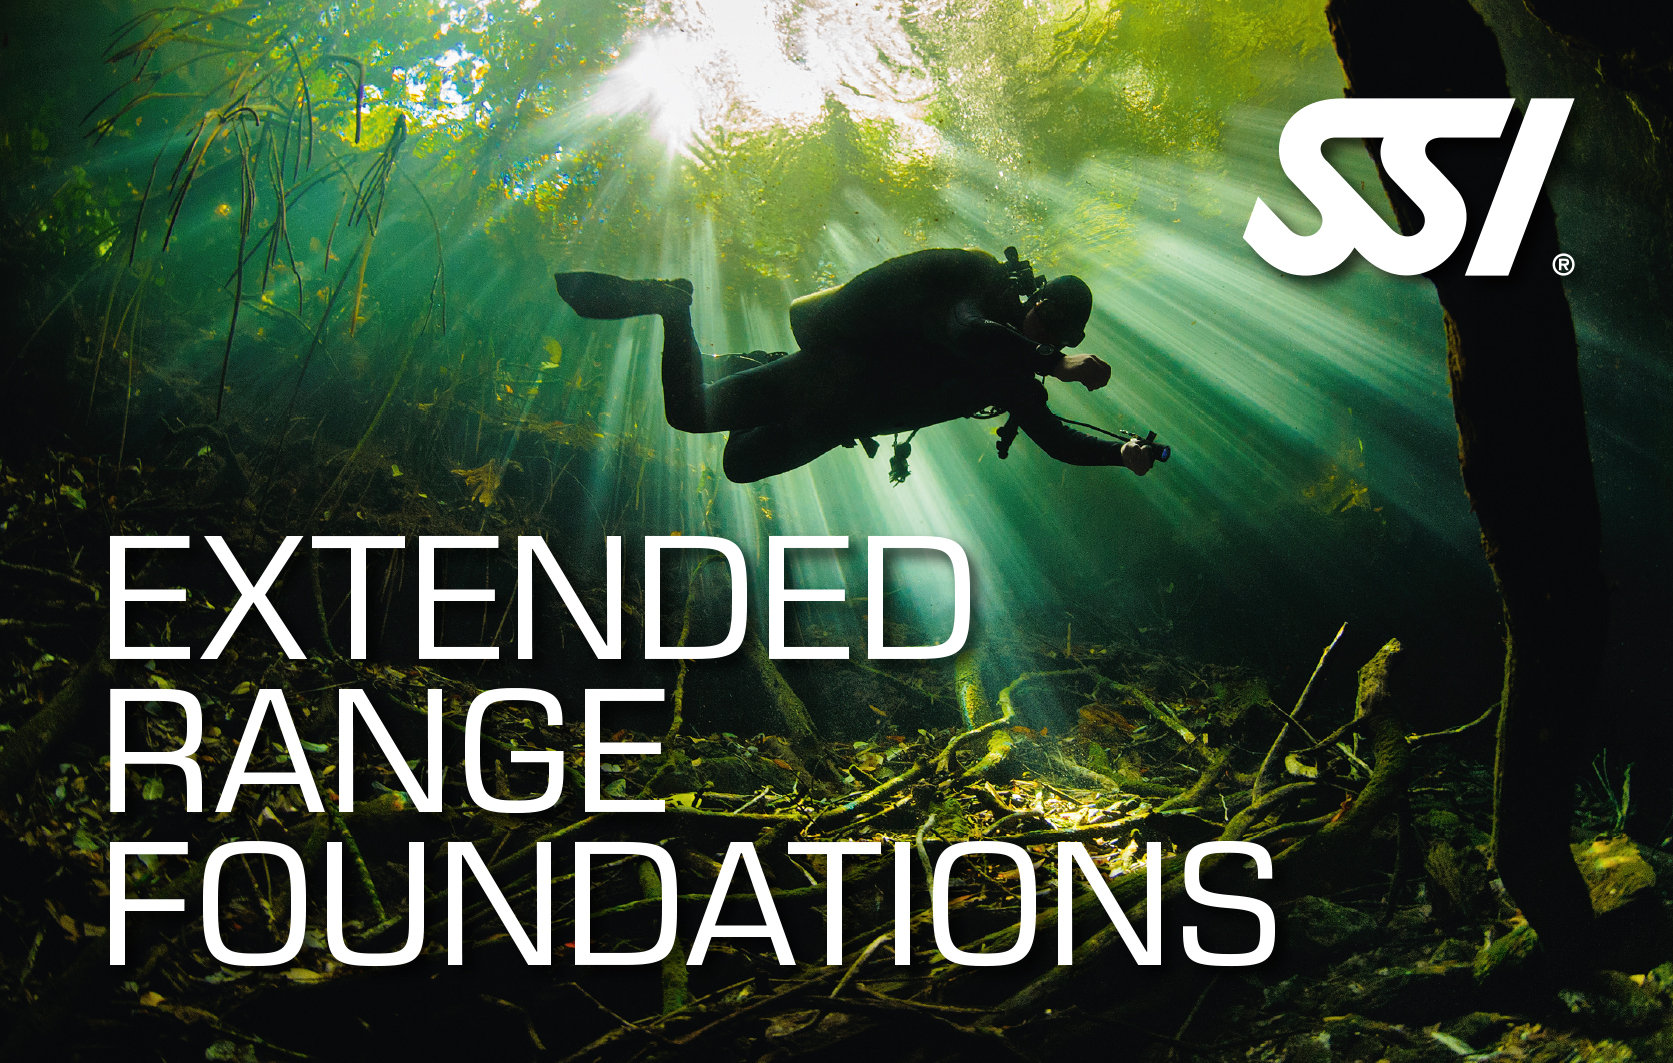 ssi-extended-range-foundations-kurs